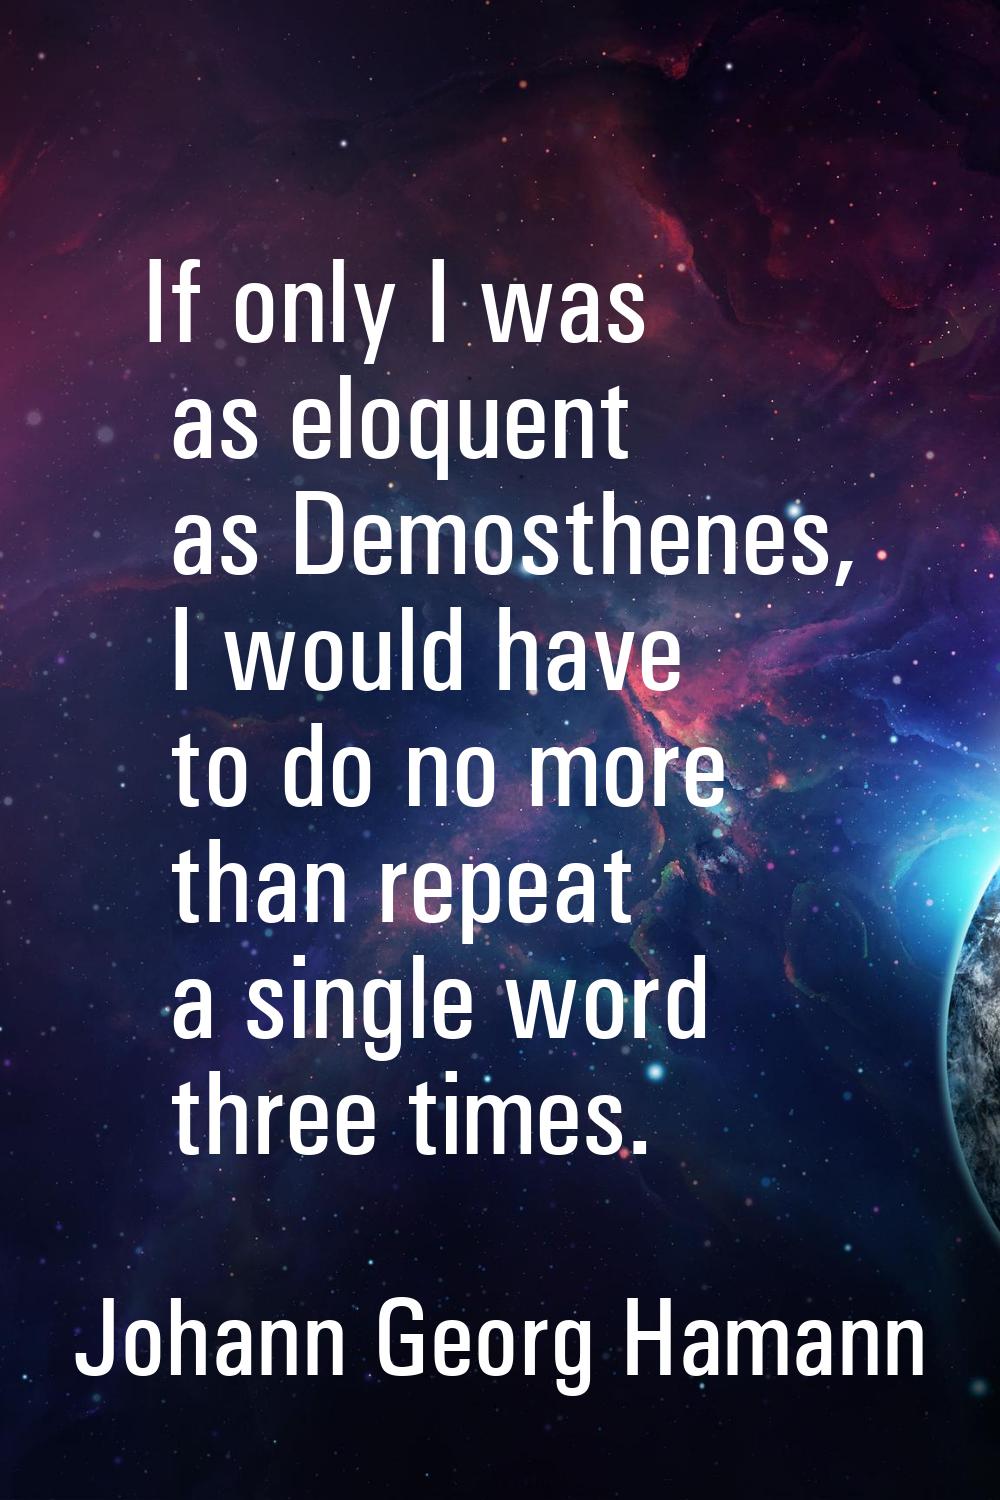 If only I was as eloquent as Demosthenes, I would have to do no more than repeat a single word thre